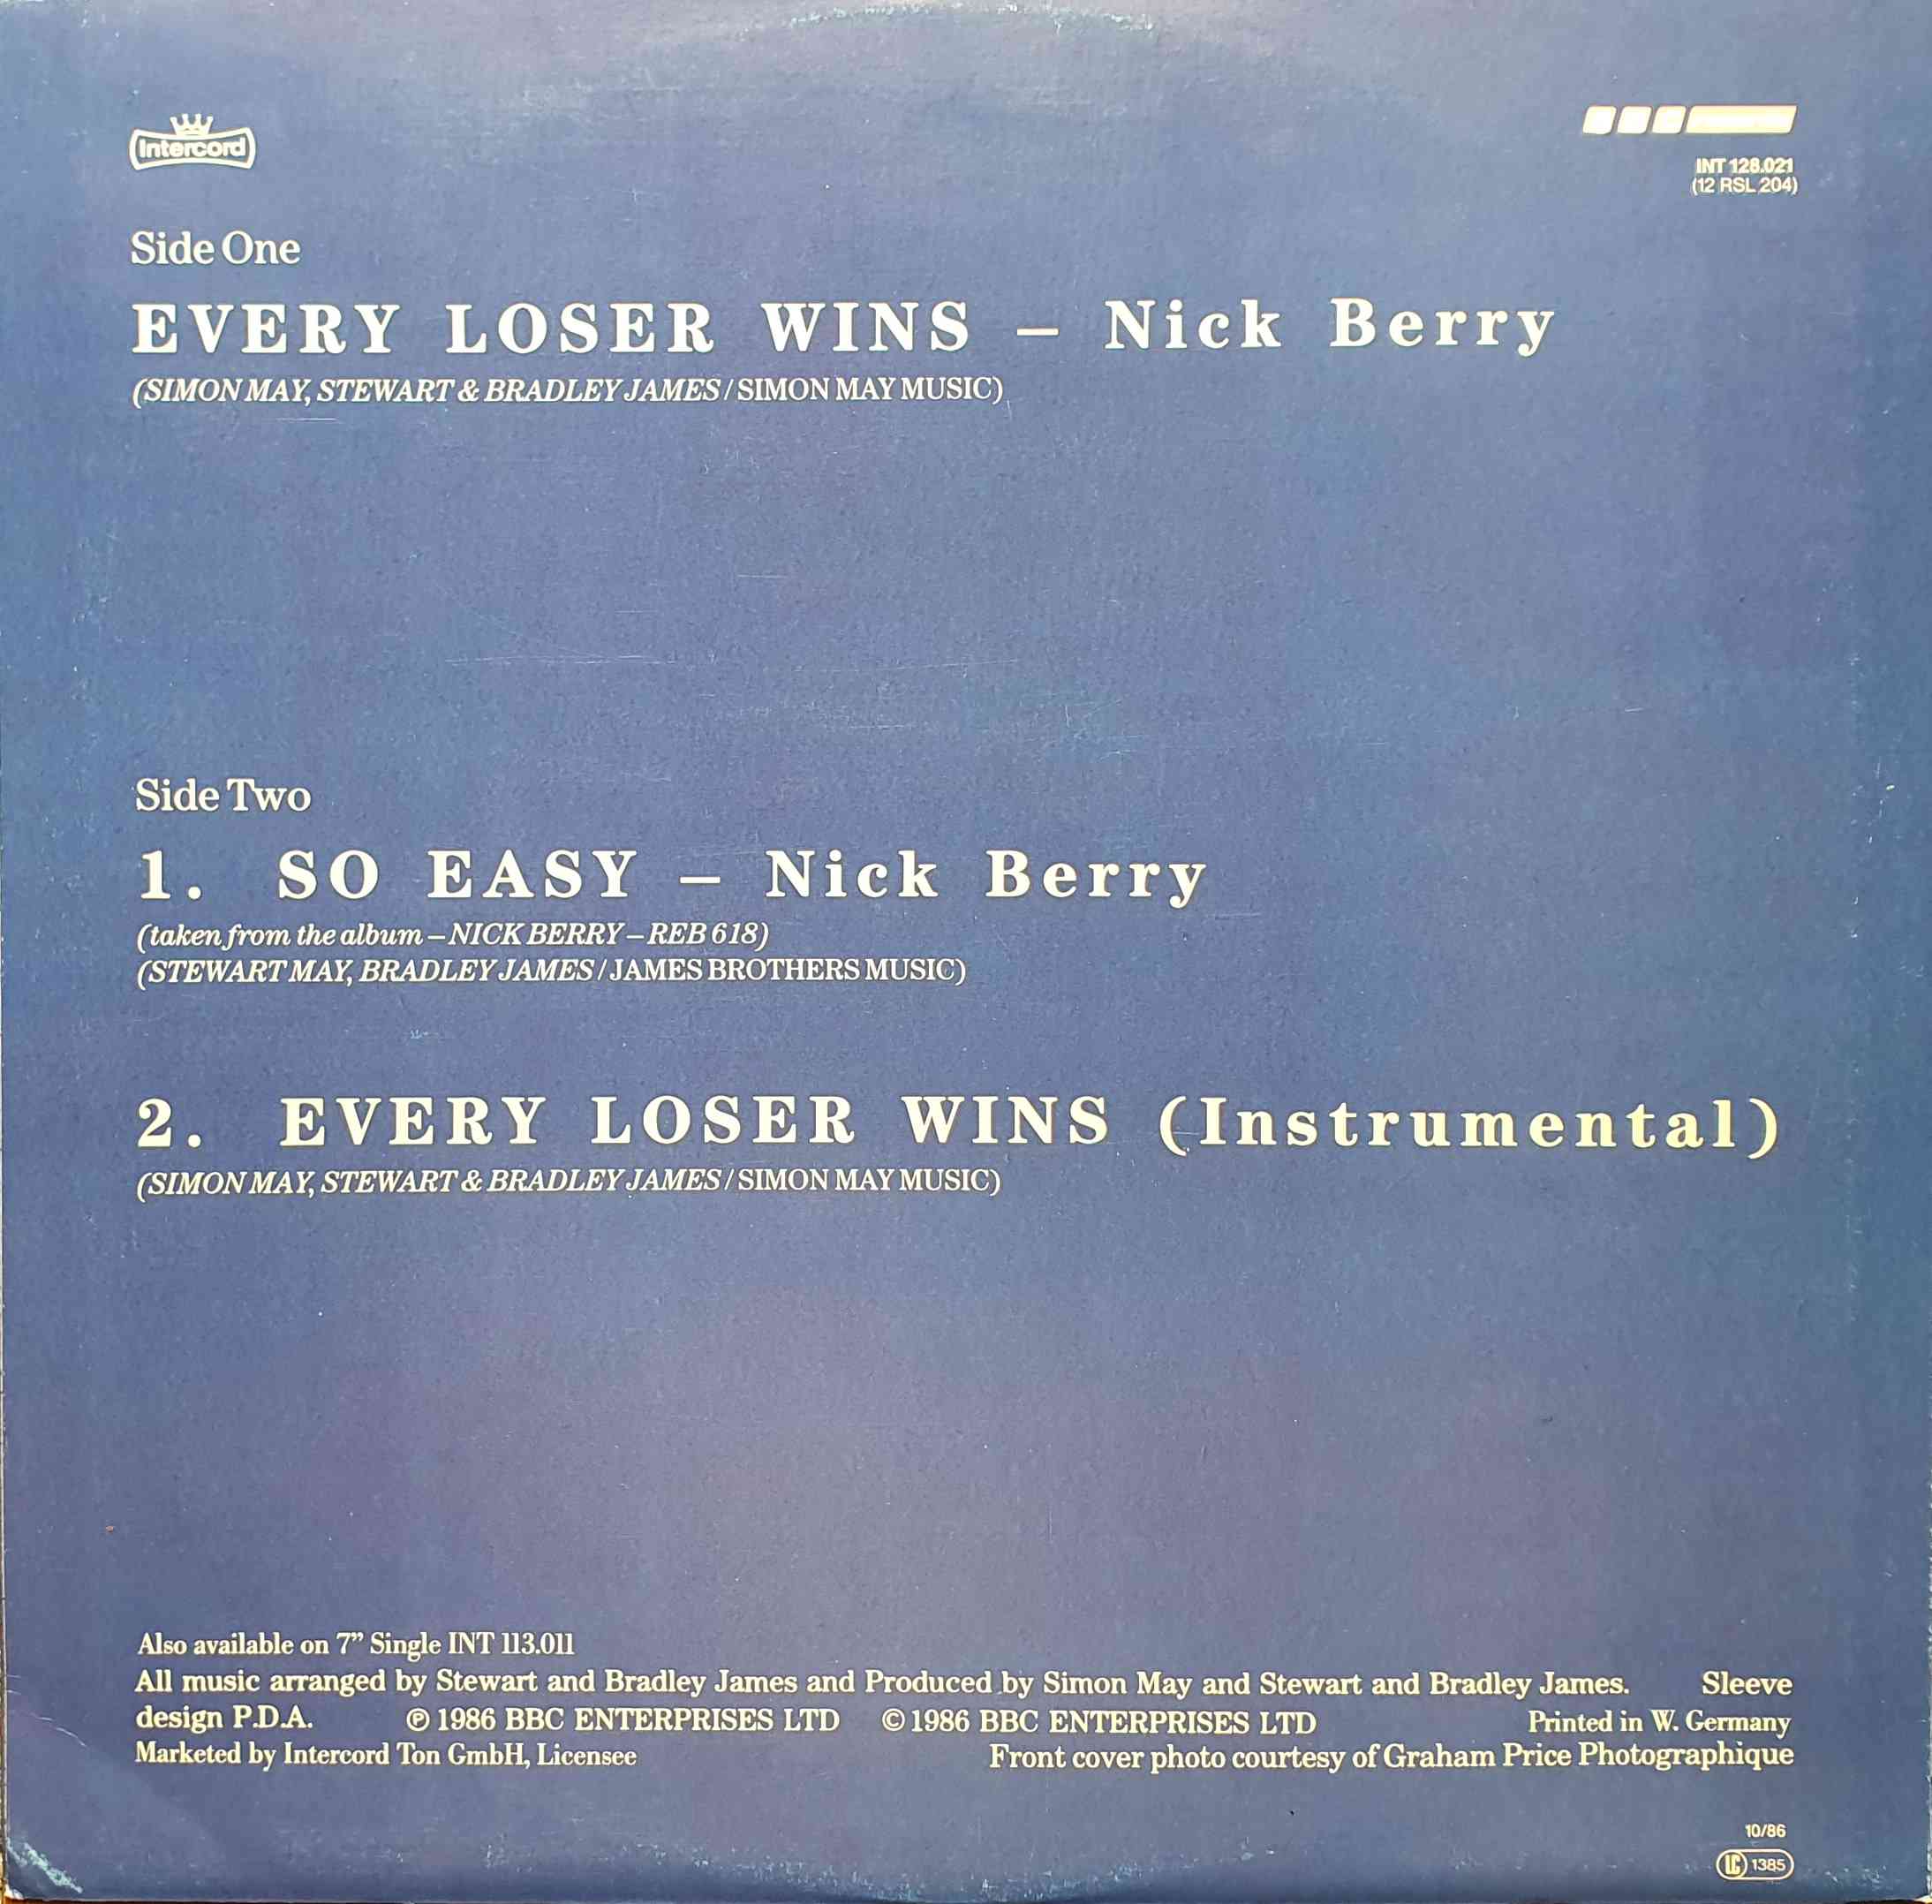 Picture of INT 128.021 Every loser wins (EastEnders) by artist Simon May / Stewart James / Bradley James / Nick Berry from the BBC records and Tapes library